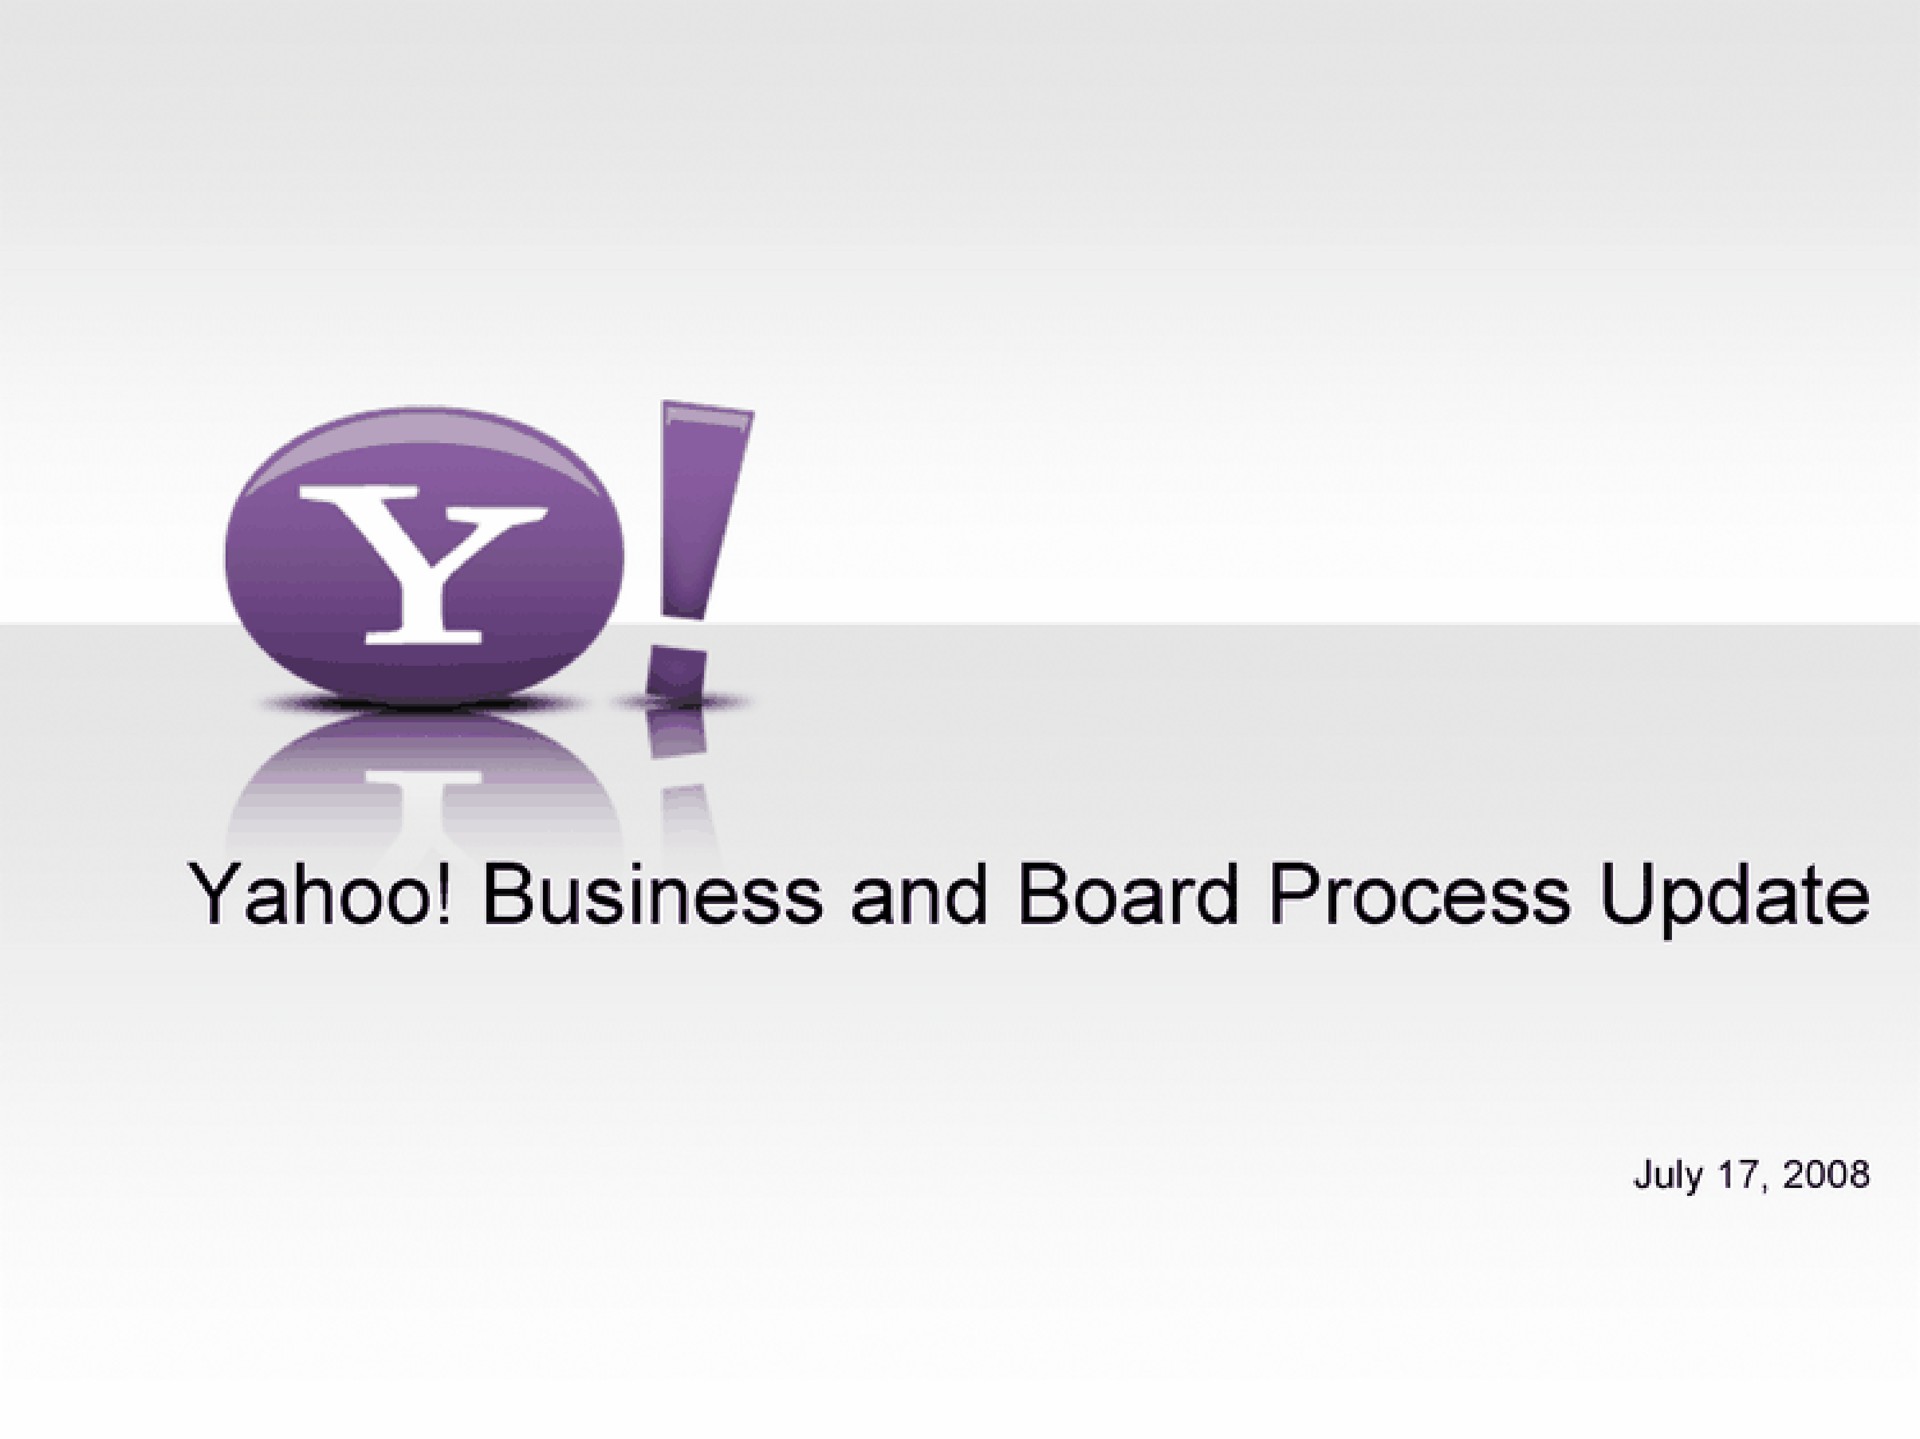 yahoo business and board process update | Yahoo